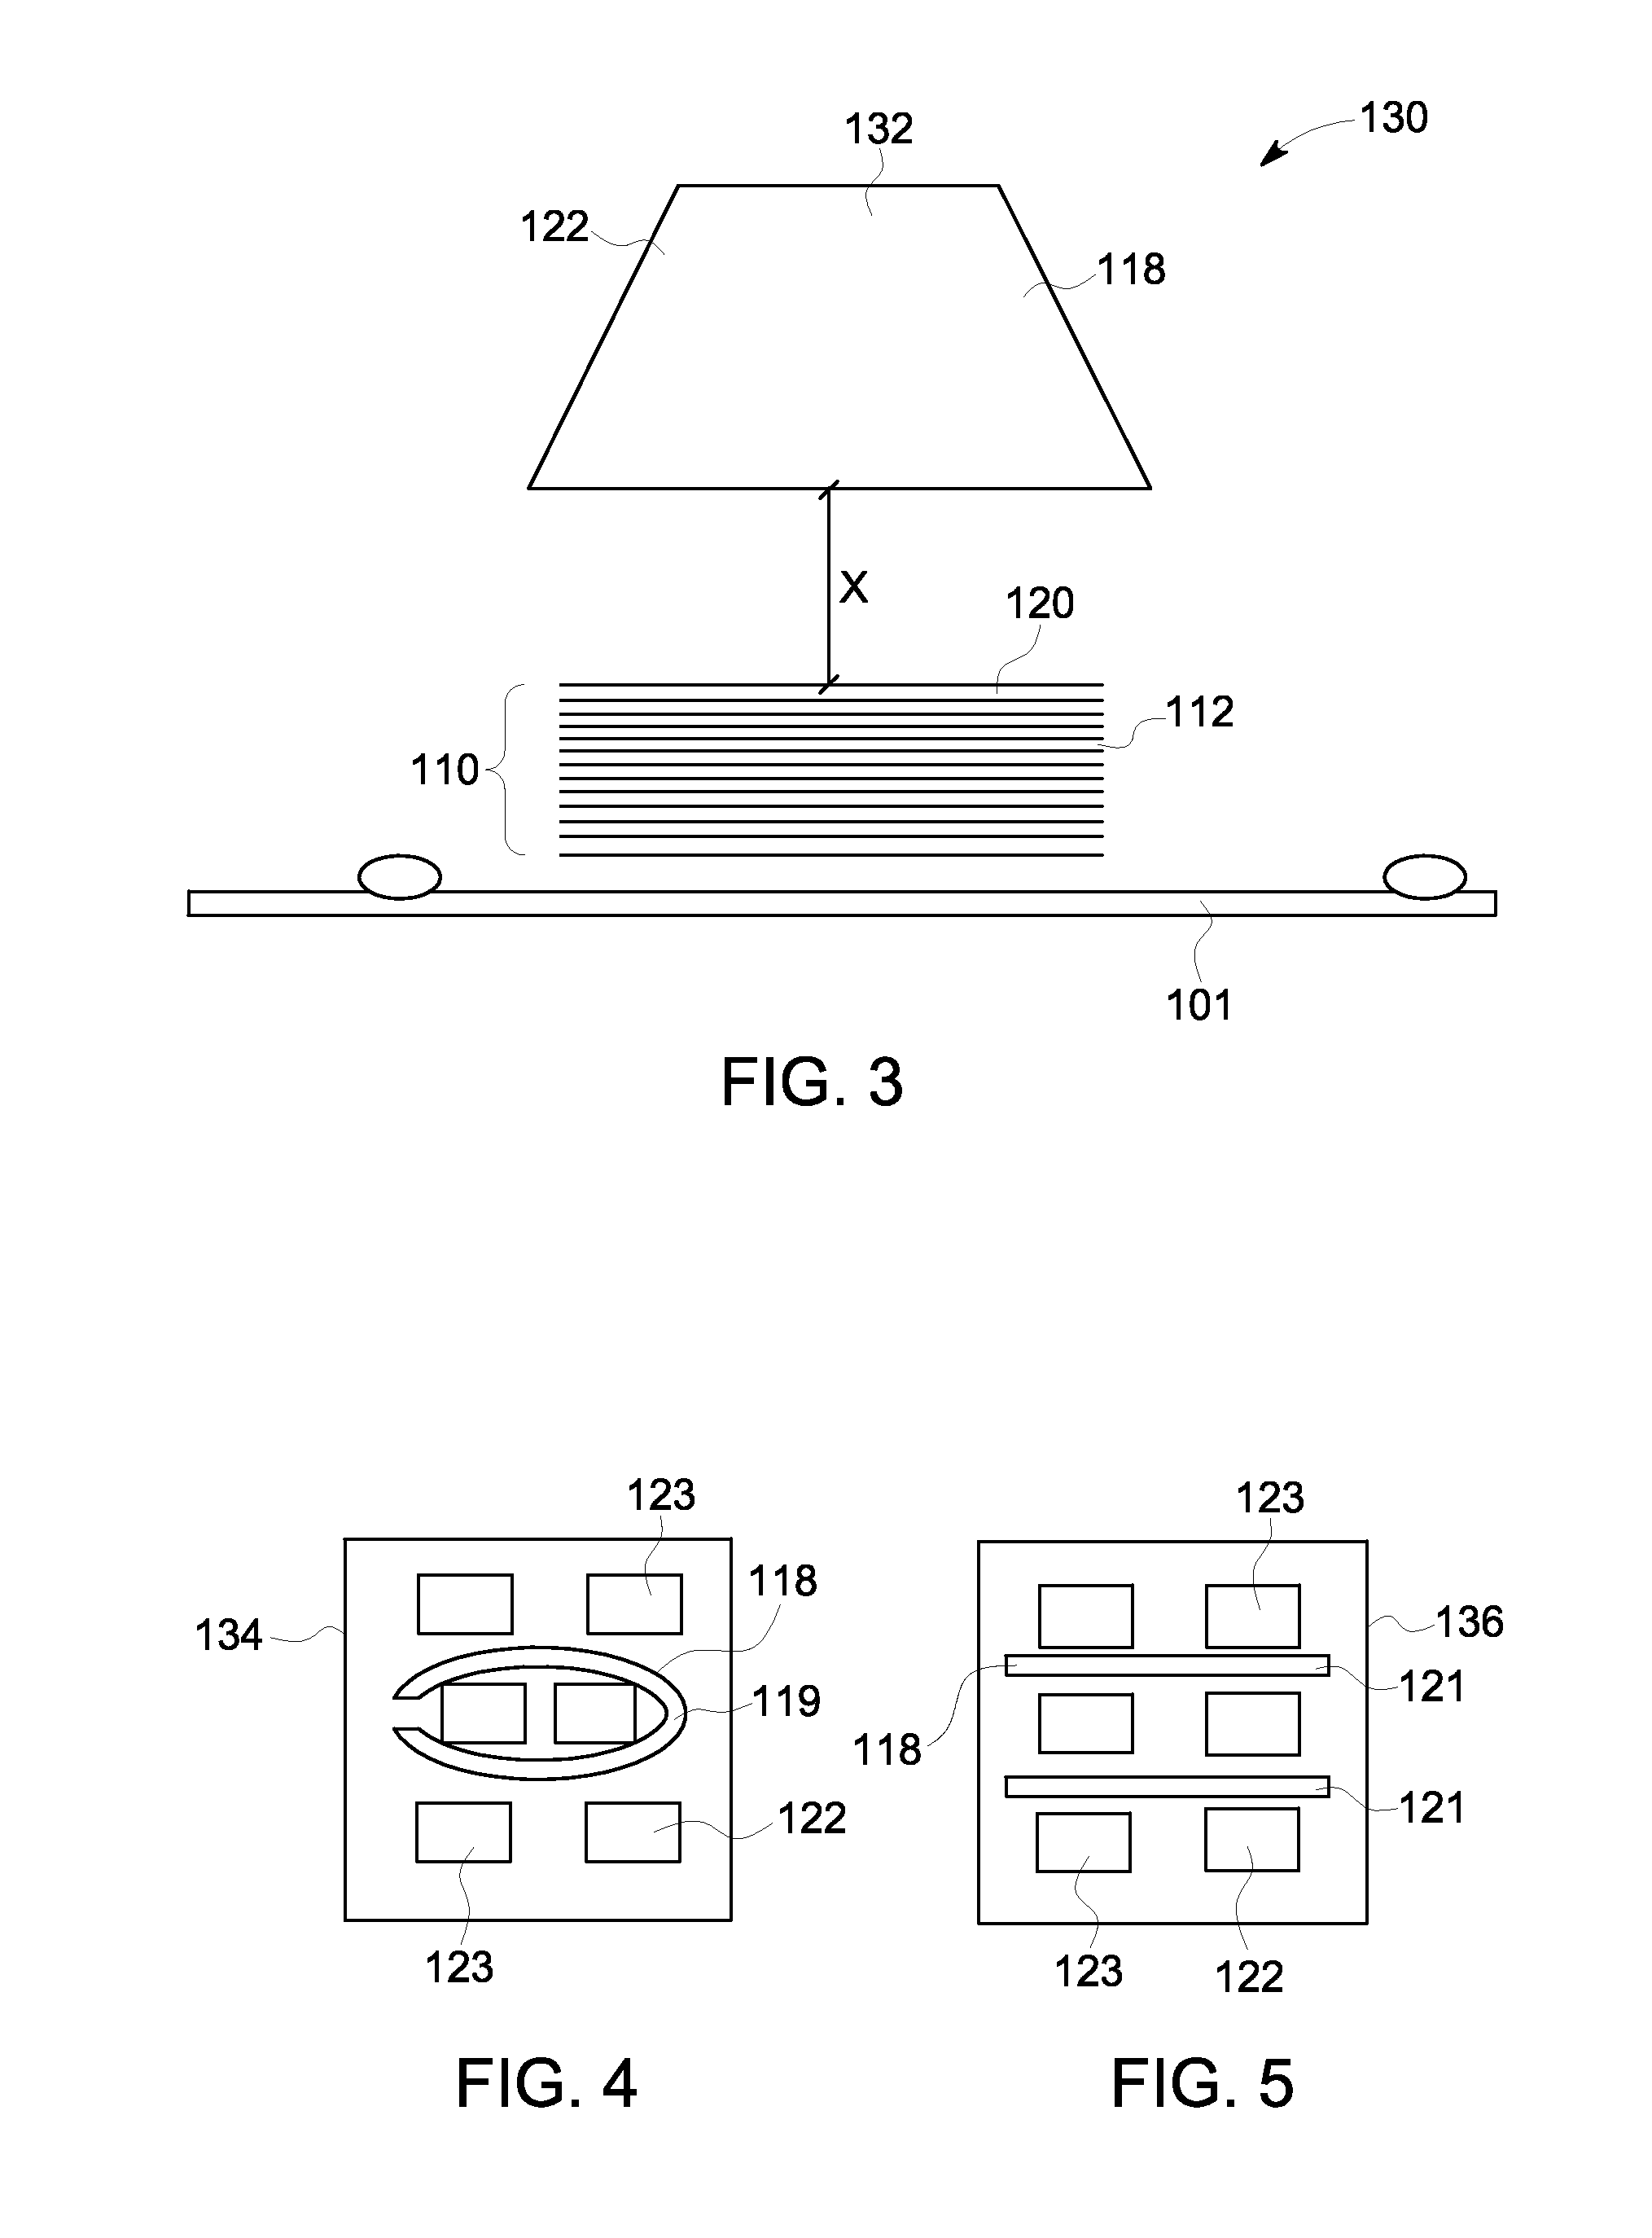 Uv-ir combination curing system and method of use for wind blade manufacture and repair